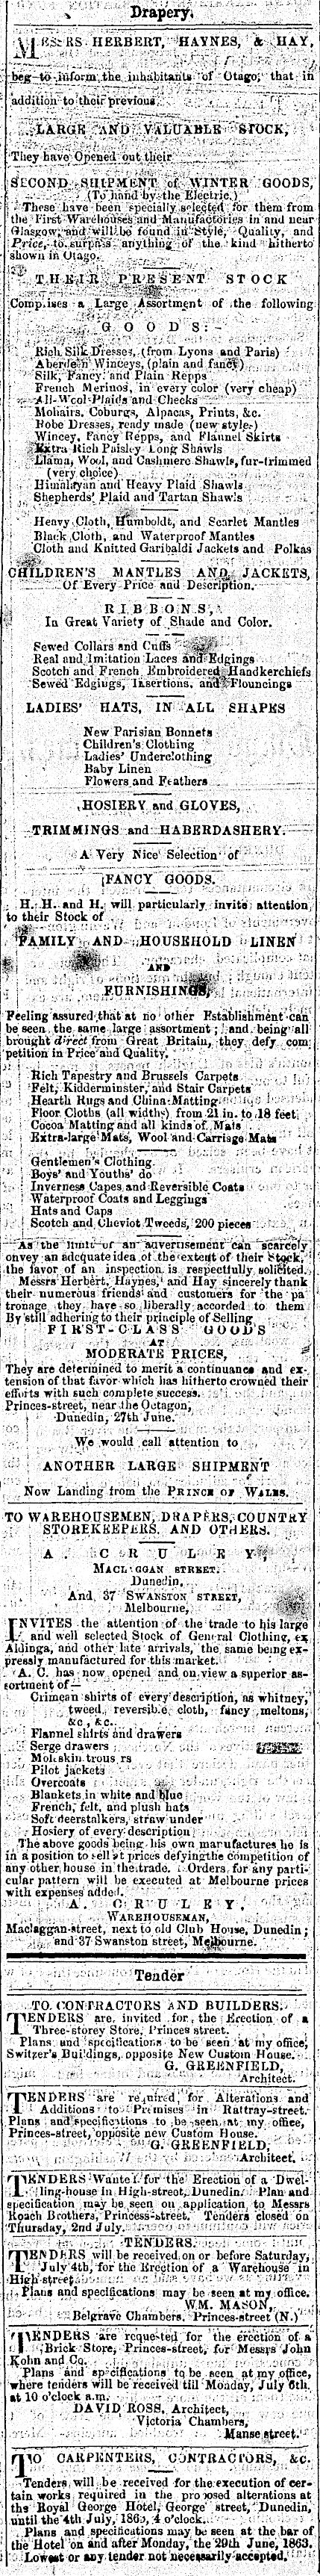 Papers Past Newspapers Otago Daily Times 30 June 1863 Page 3 Advertisements Column 3